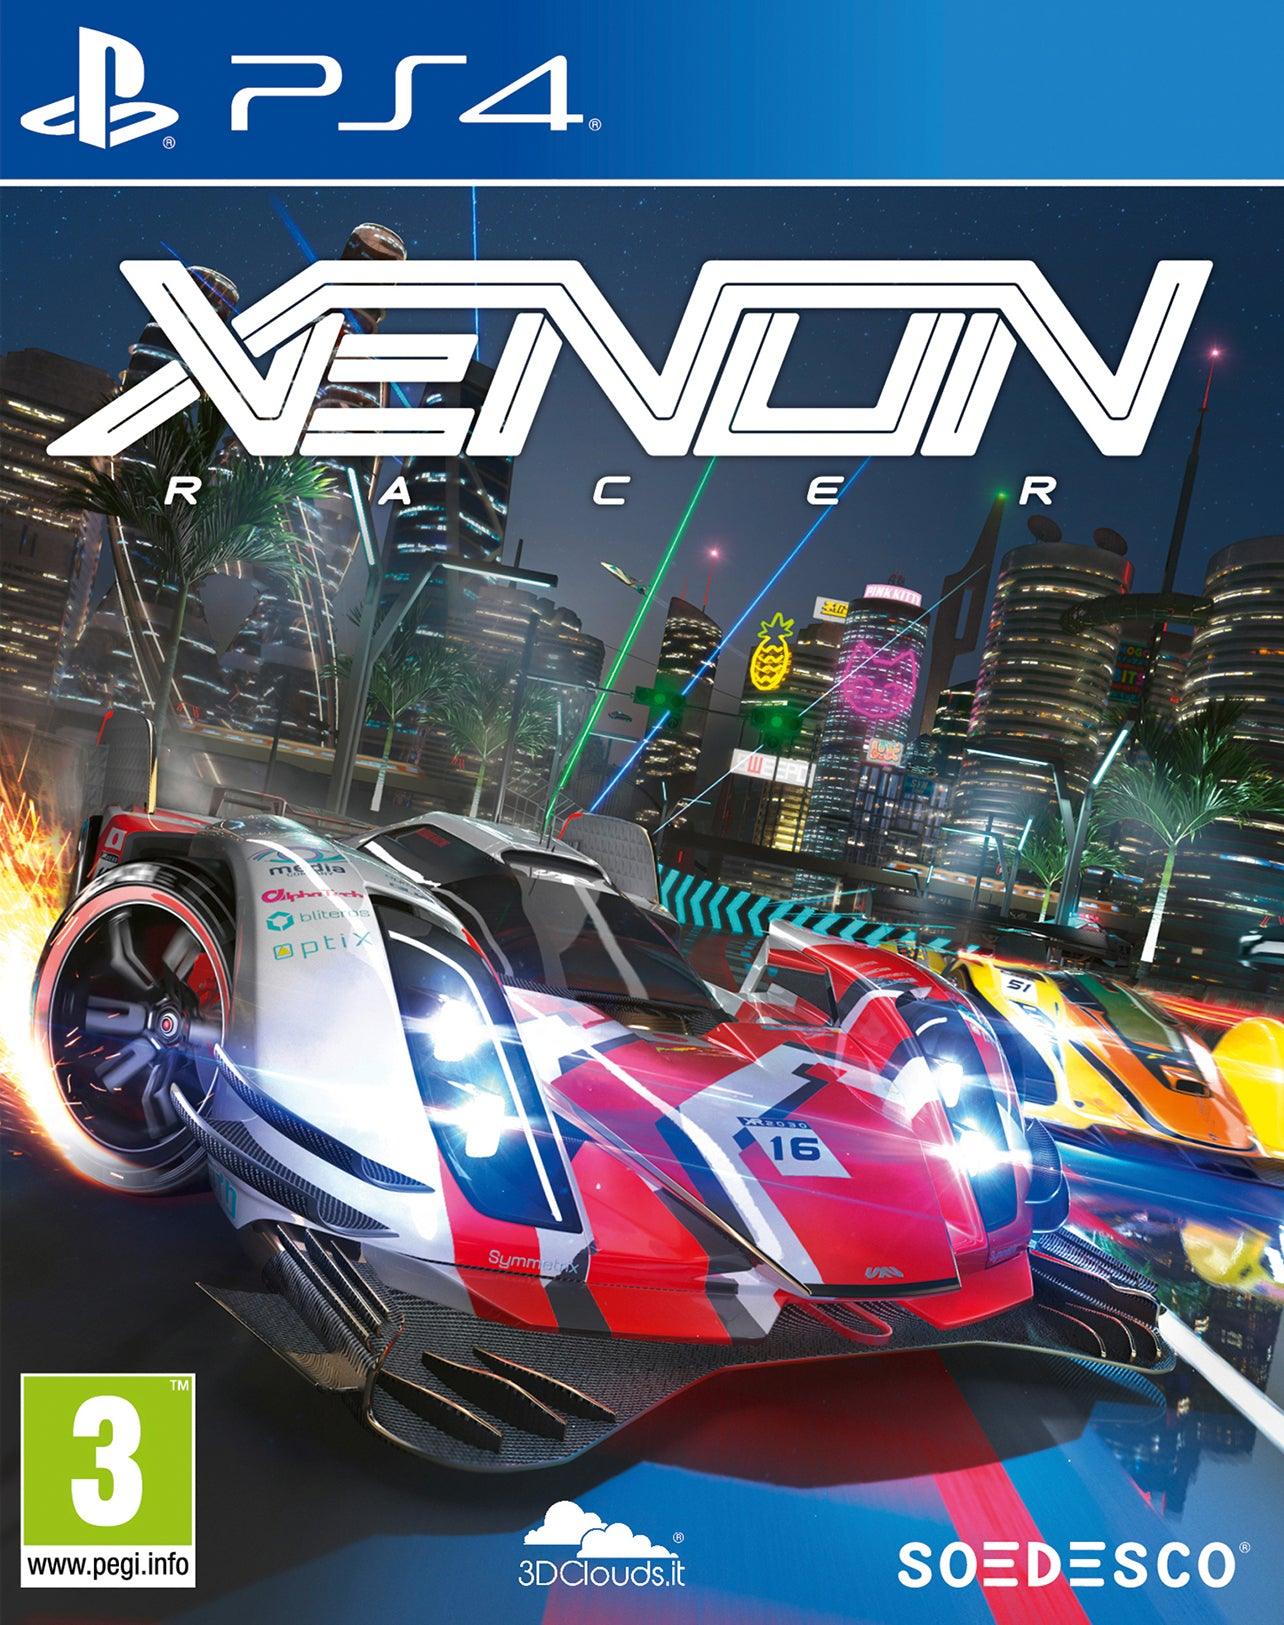 Xenon Racer - Want a New Gadget